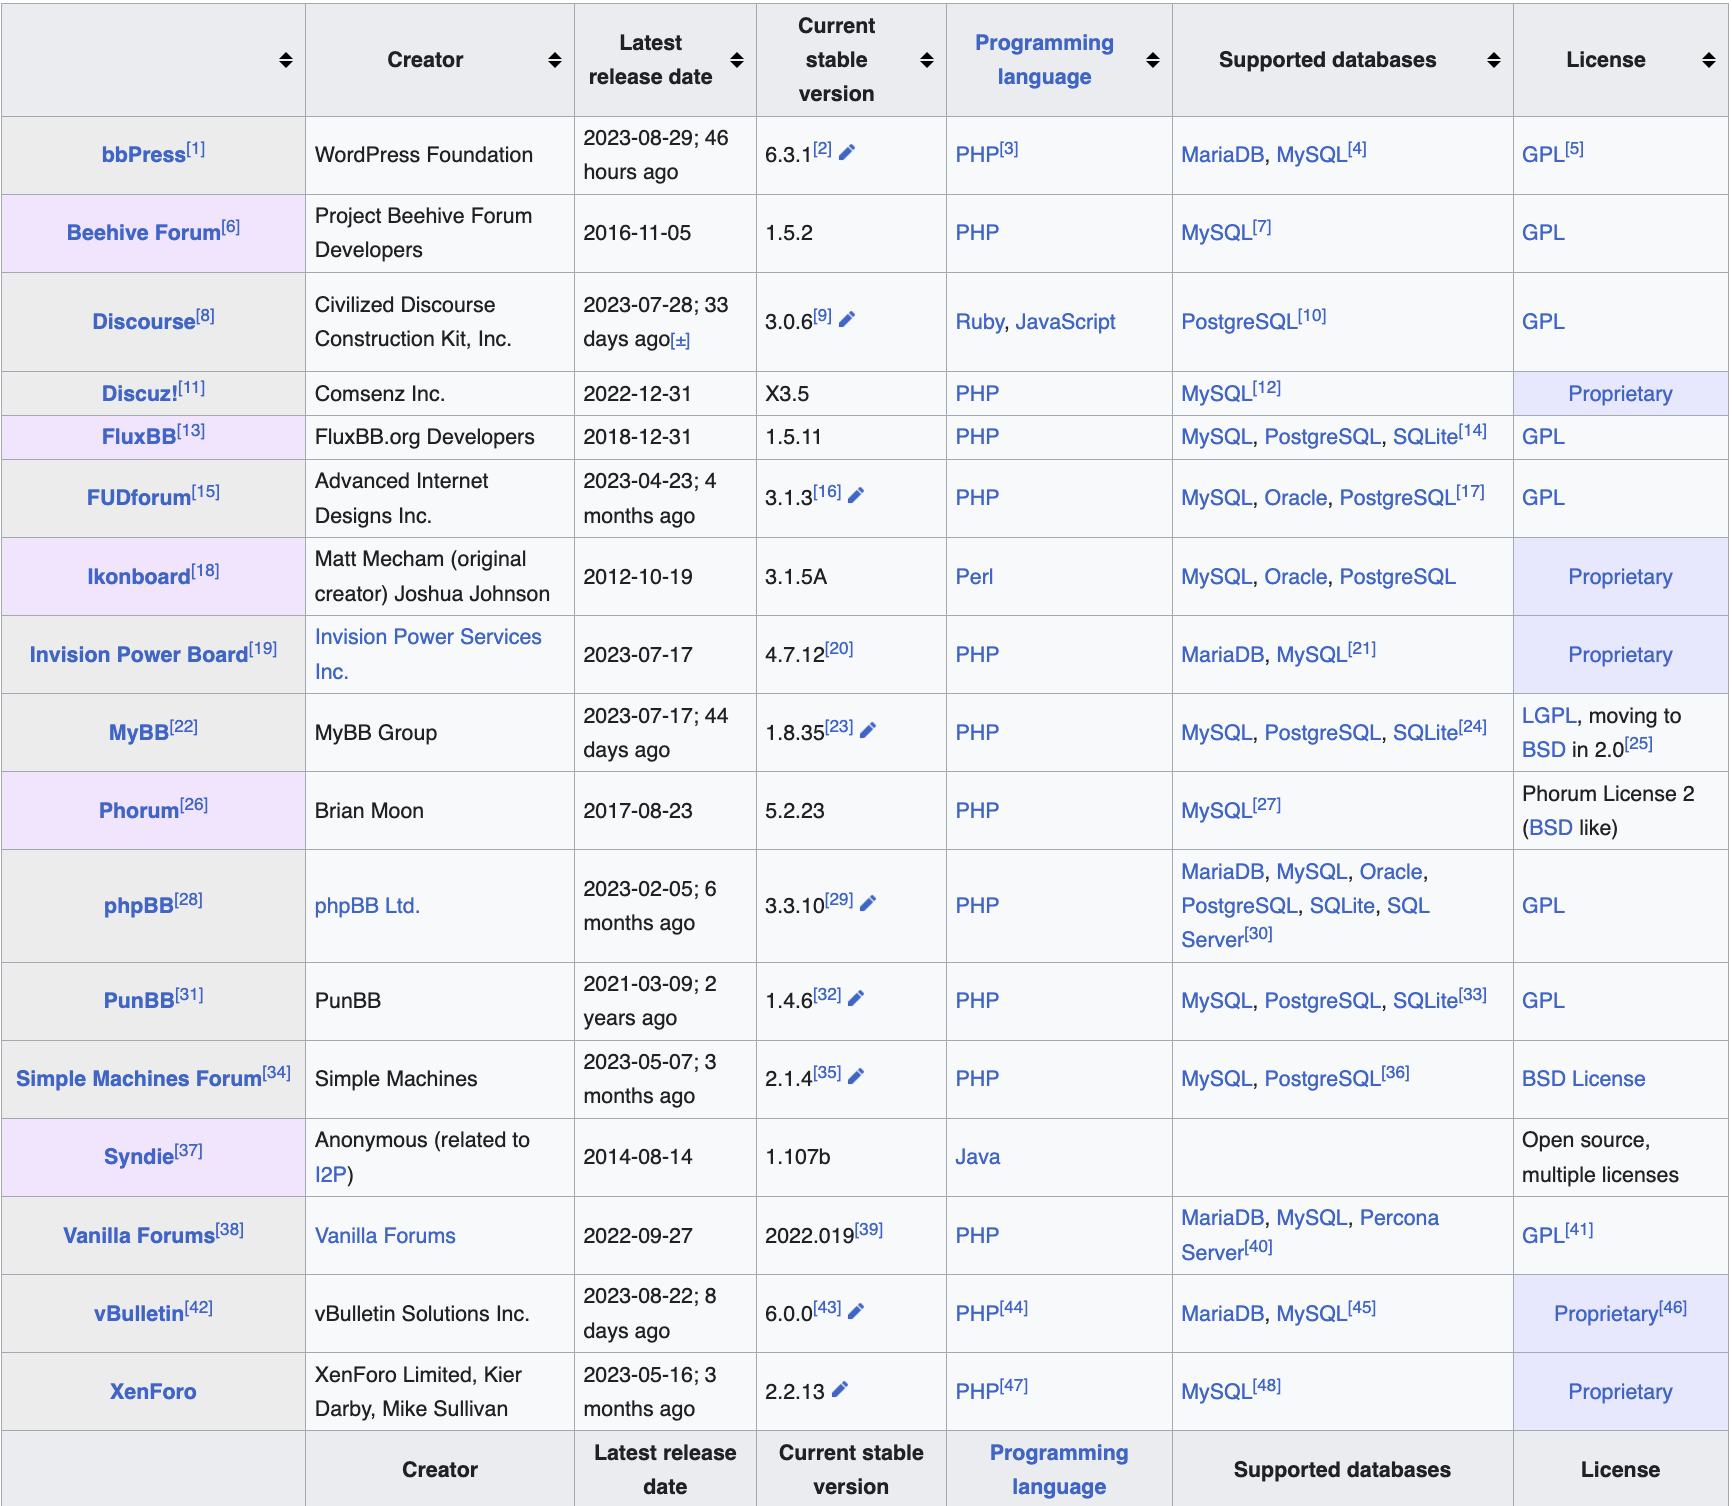 Screenshot of table from https://en.wikipedia.org/wiki/Comparison_of_Internet_forum_software. Except for Discourse and Syndie, every piece of software was written in PHP or Perl (Syndie is Java and Discourse is Ruby).